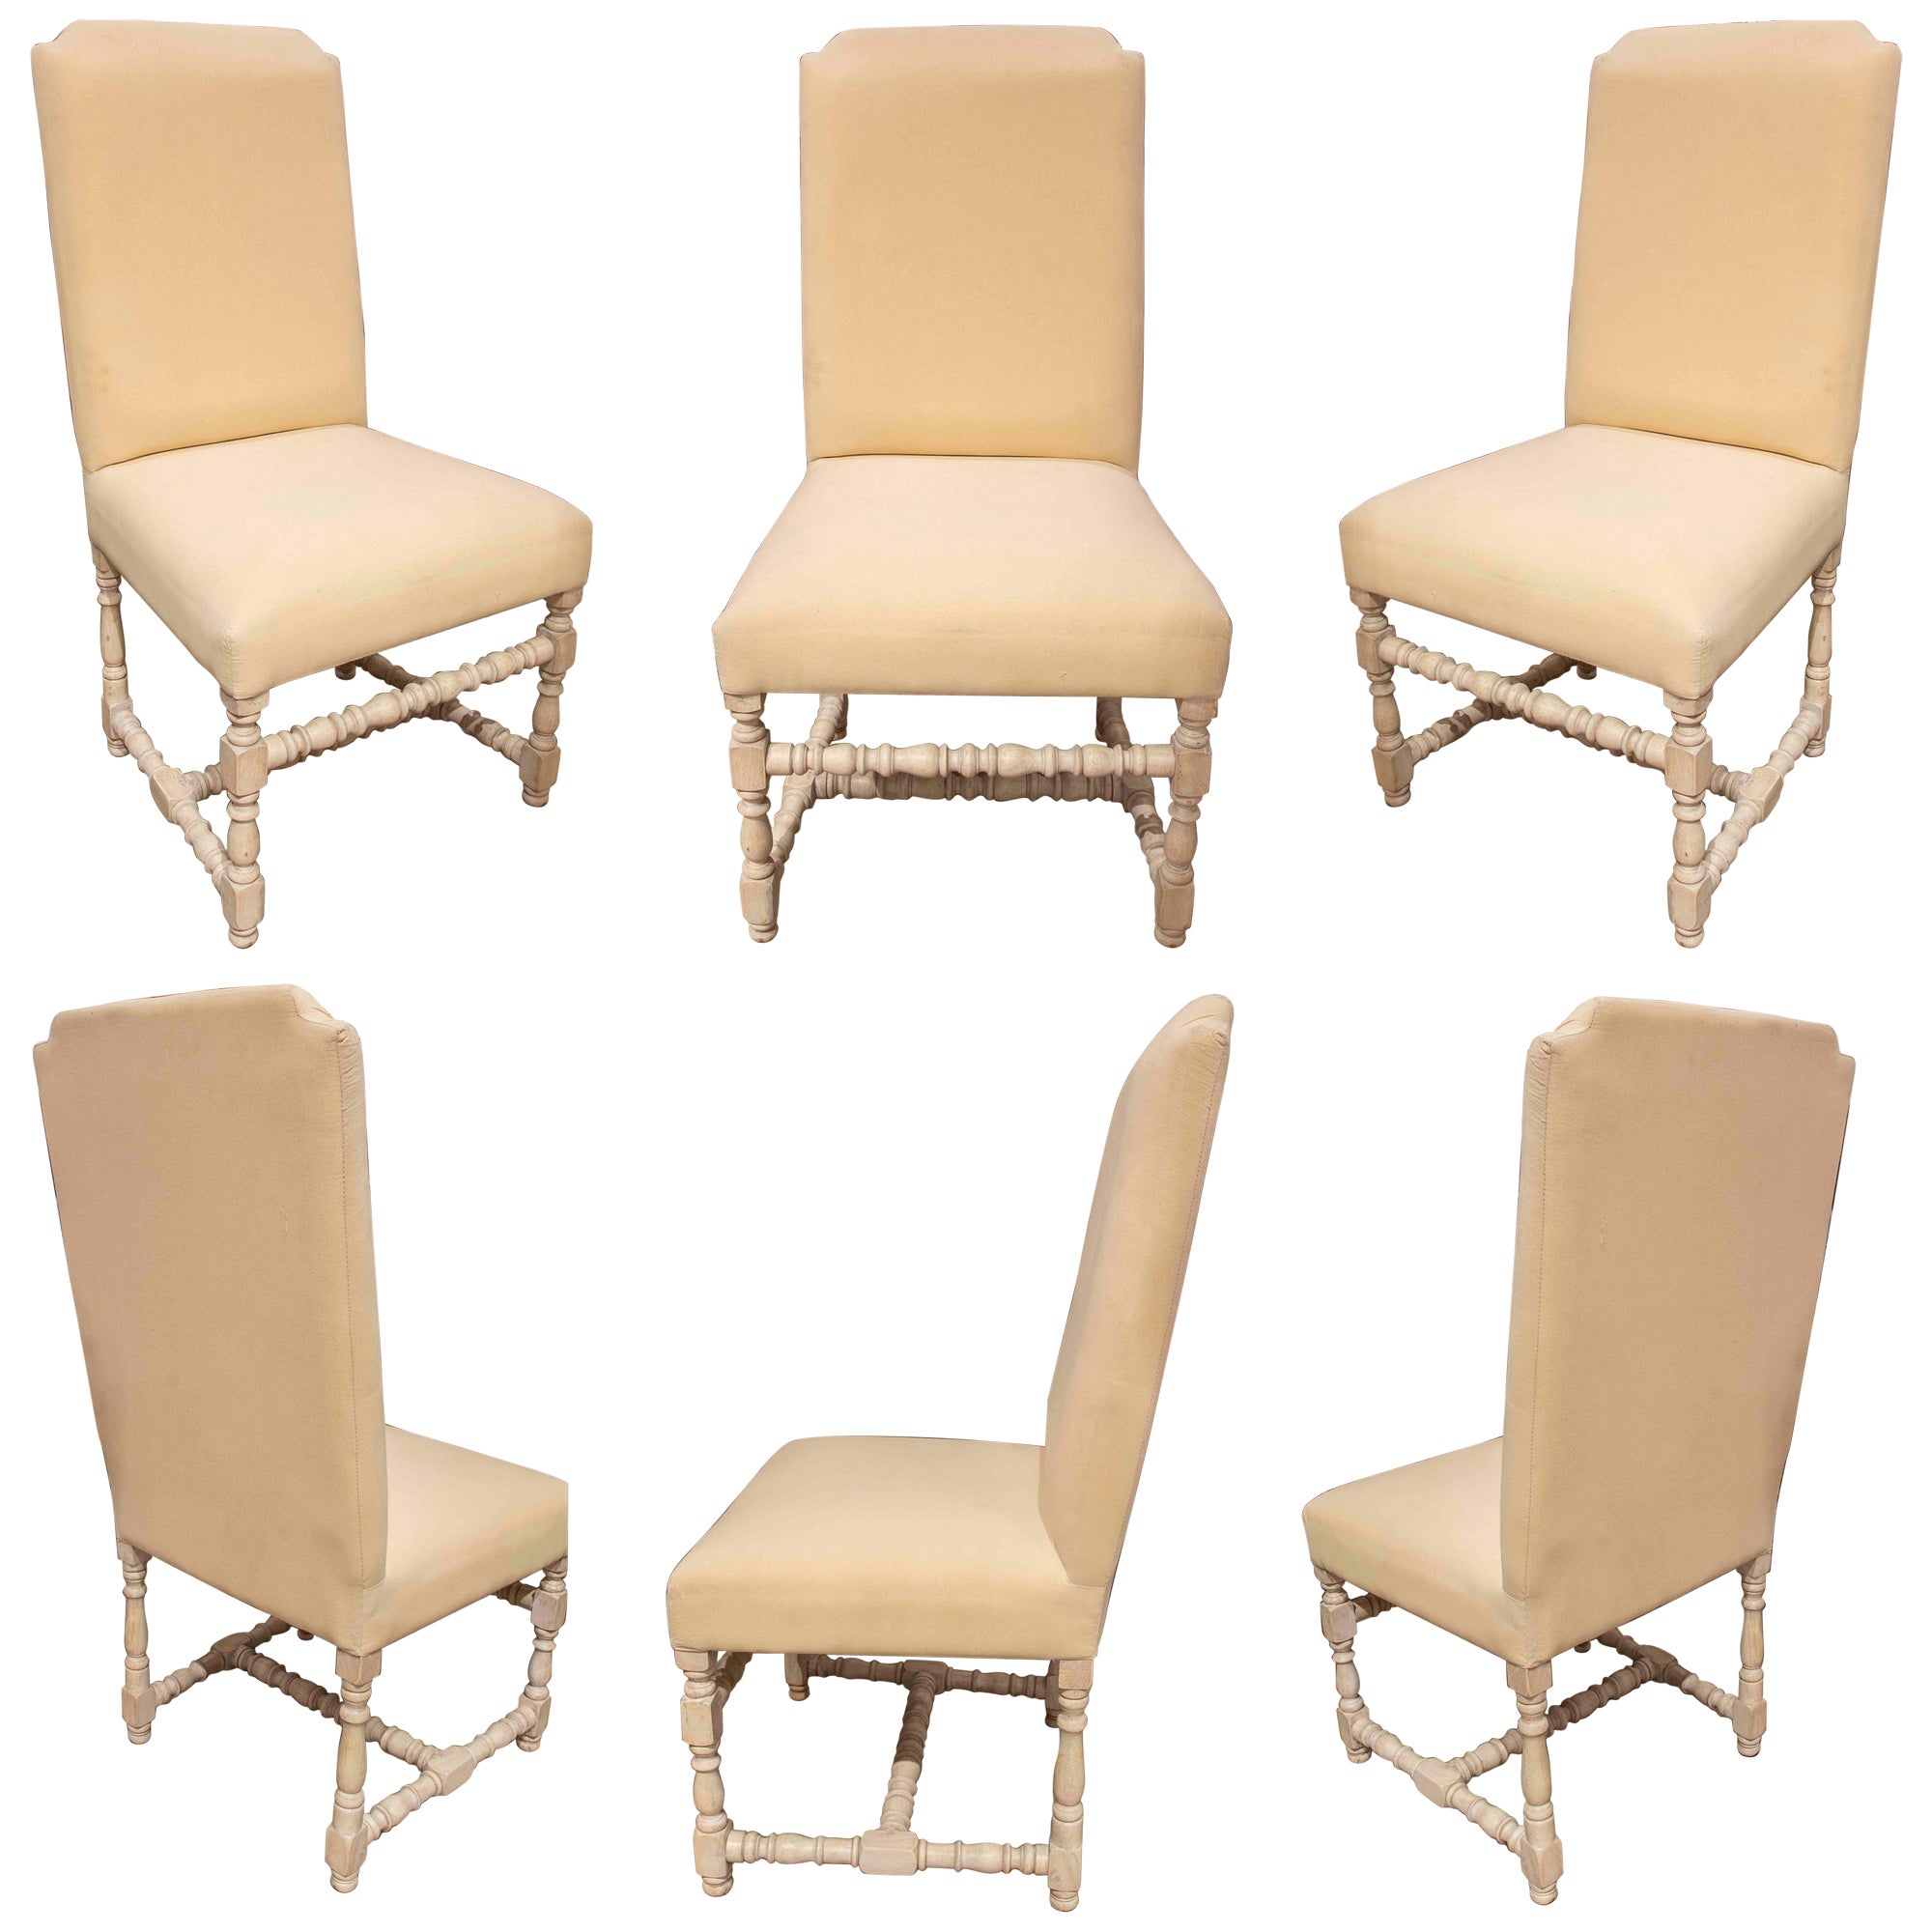 Set of Six Wooden High Backed Dining Chairs for Upholstery